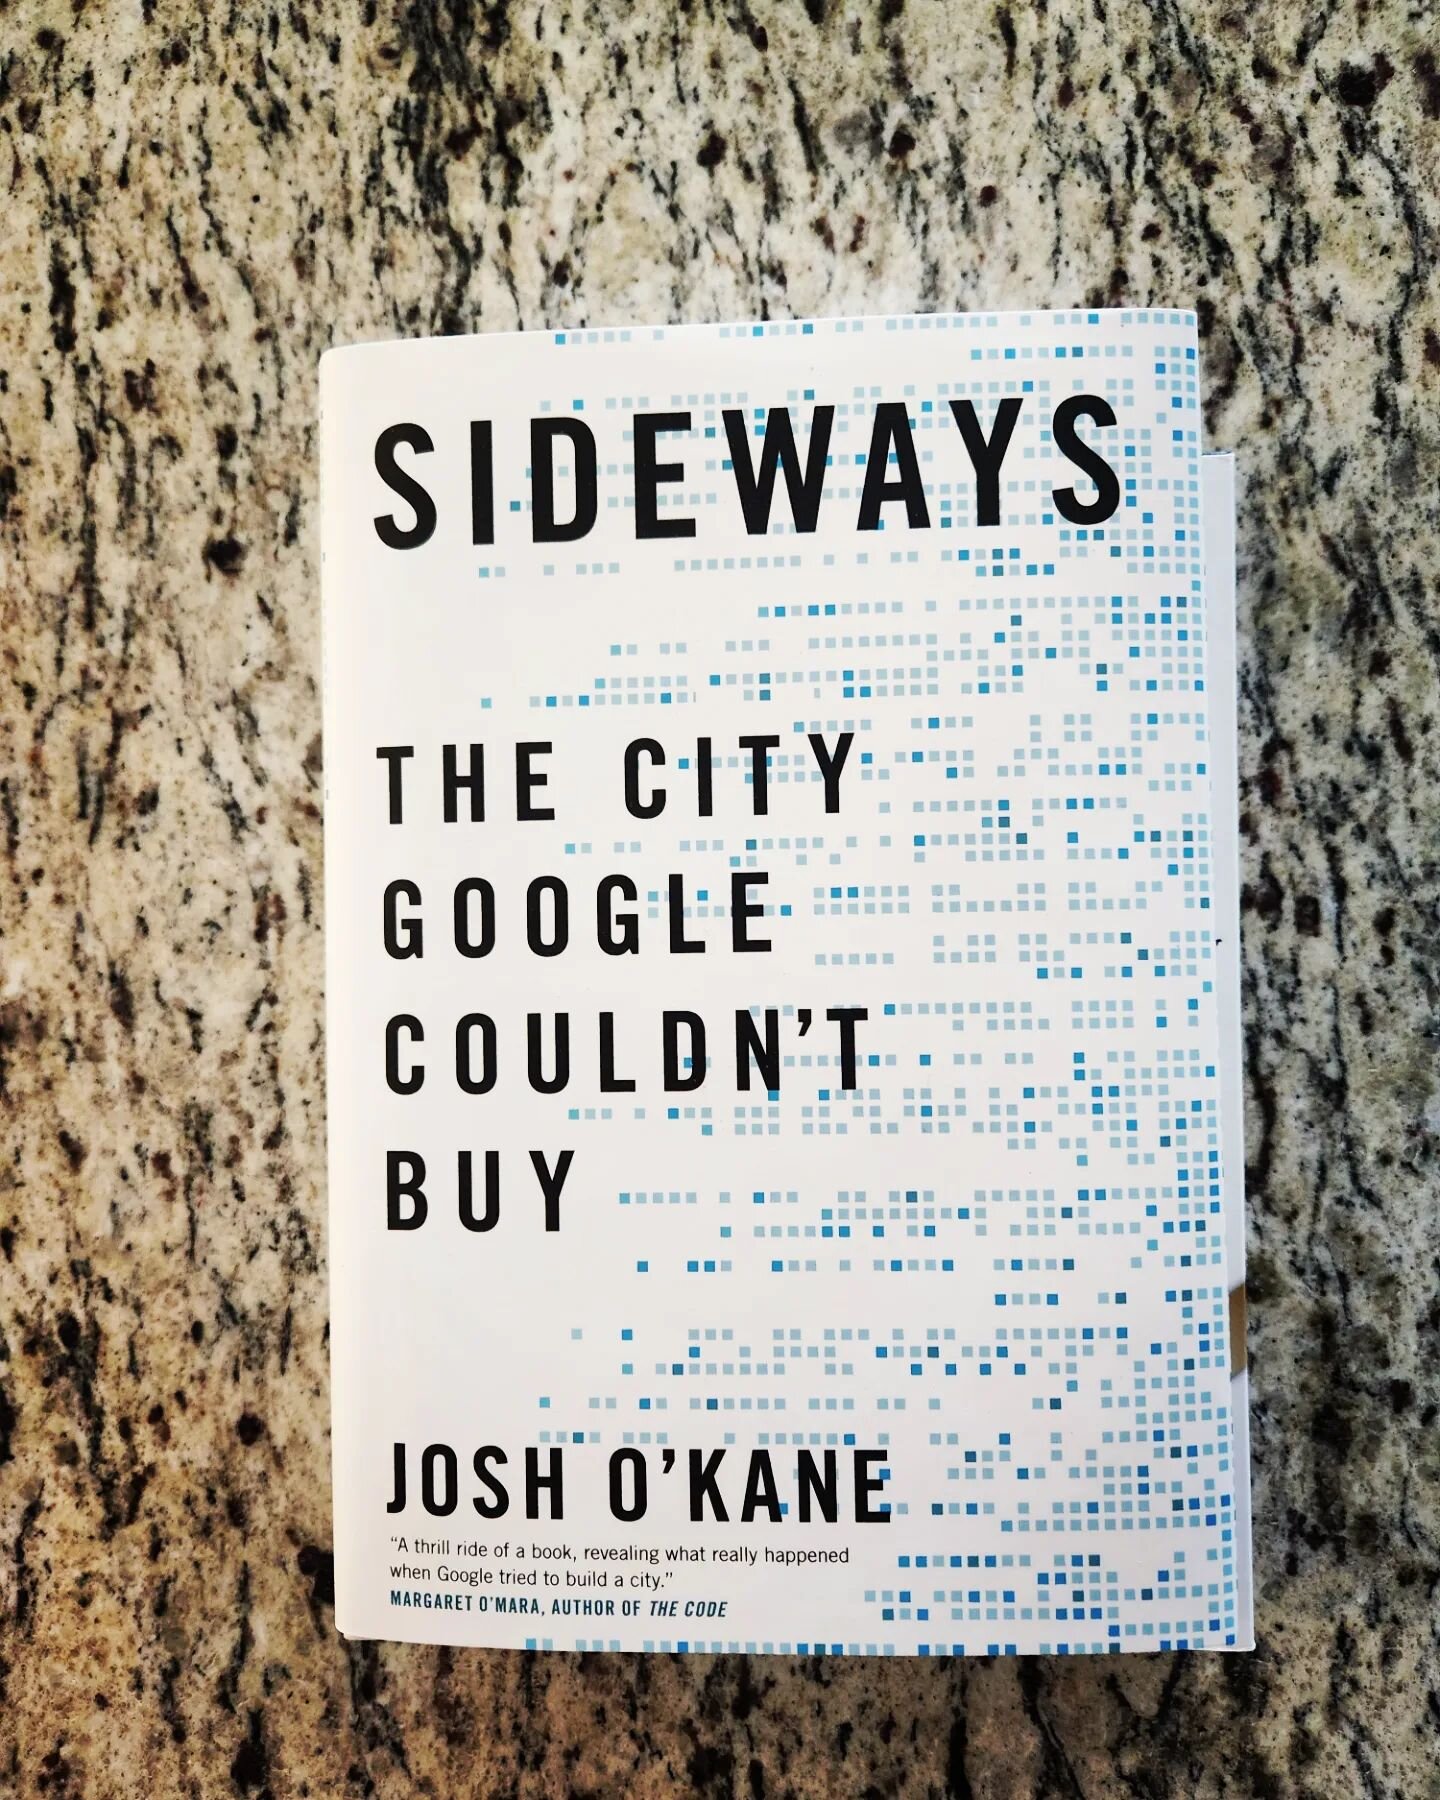 I recently did a podcast with Josh O'Kane, which brought this first book to my attention: documenting one of the largest digital infrastructure project failures in Canada's history. And with all this Y2K-like ridiculousness I thought I'd read-up on a